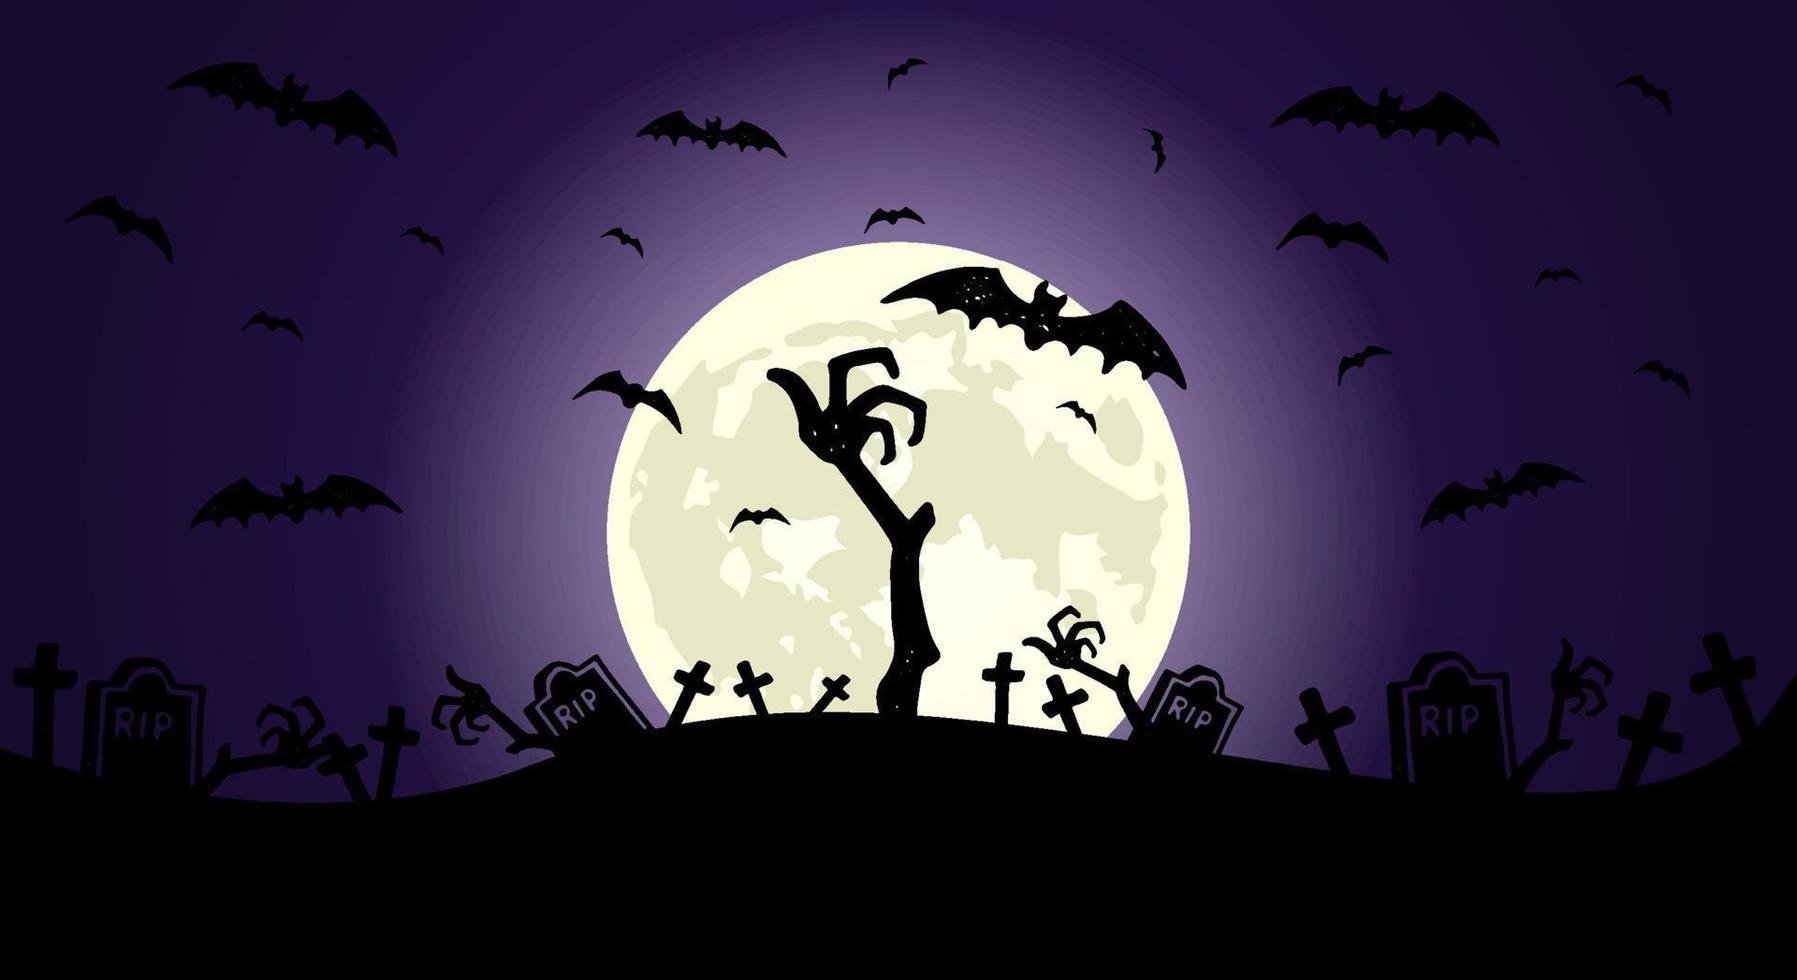 zombie hand in front of full moon with scary illustrated elements for Halloween background layouts vector